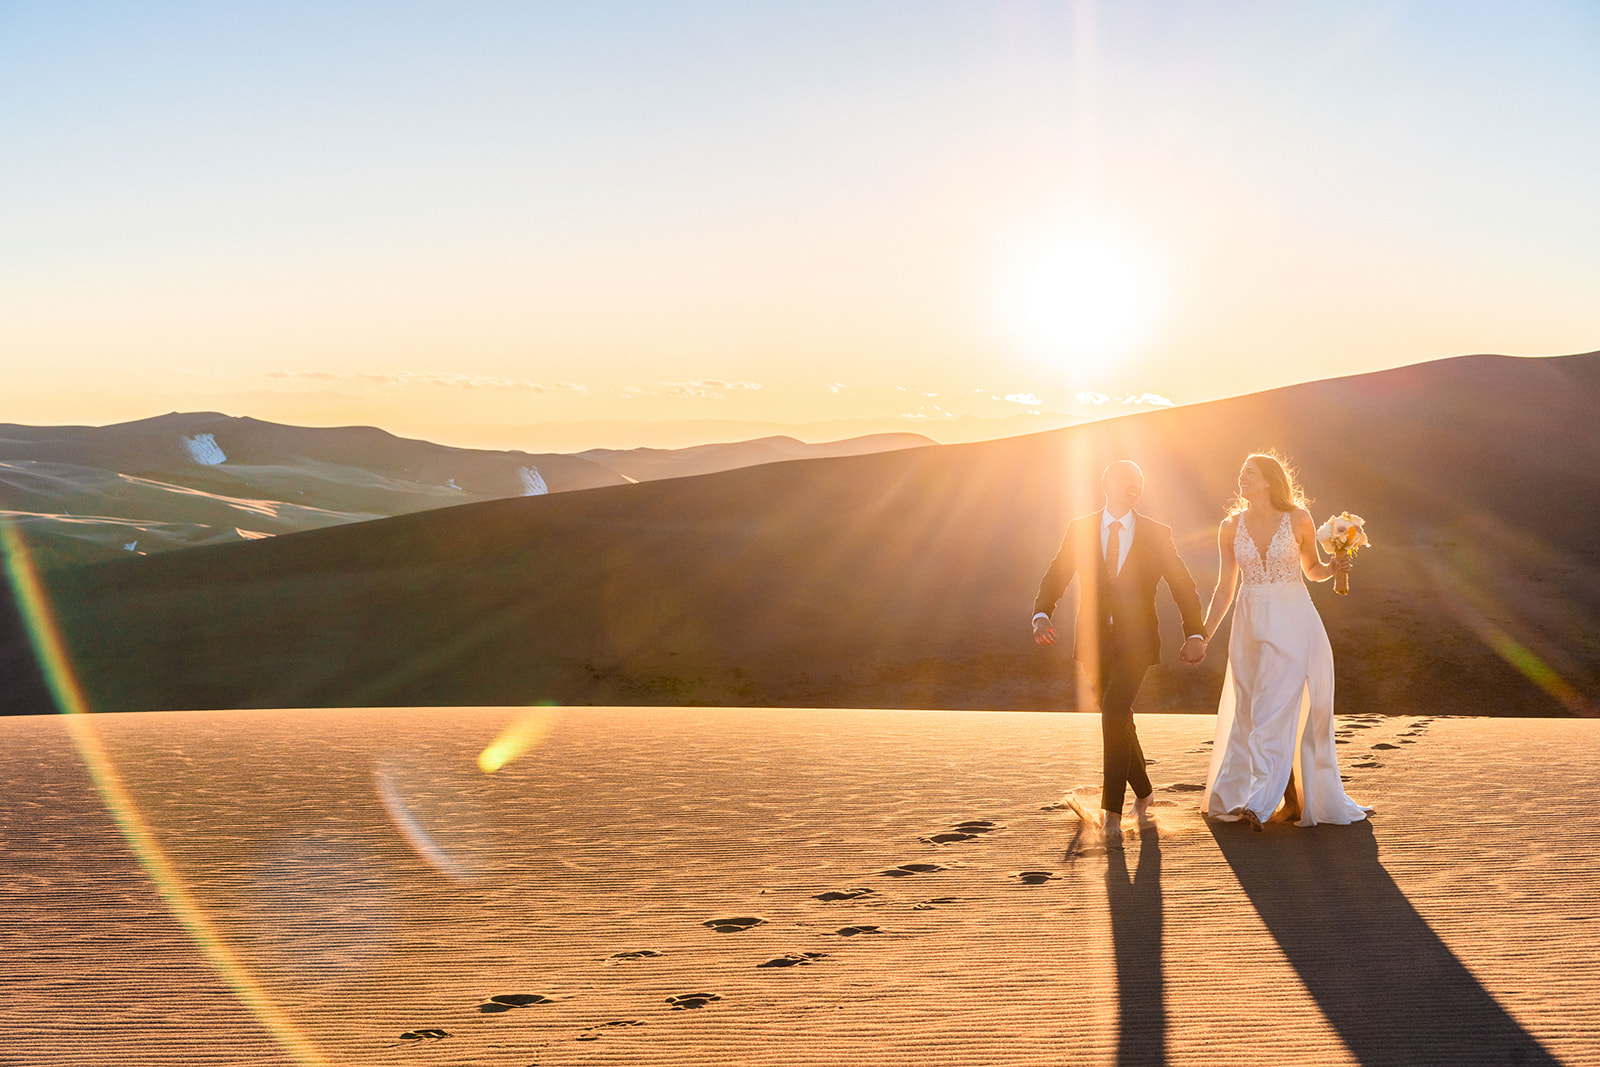 A bride and groom walking through the sand dunes at sunset.